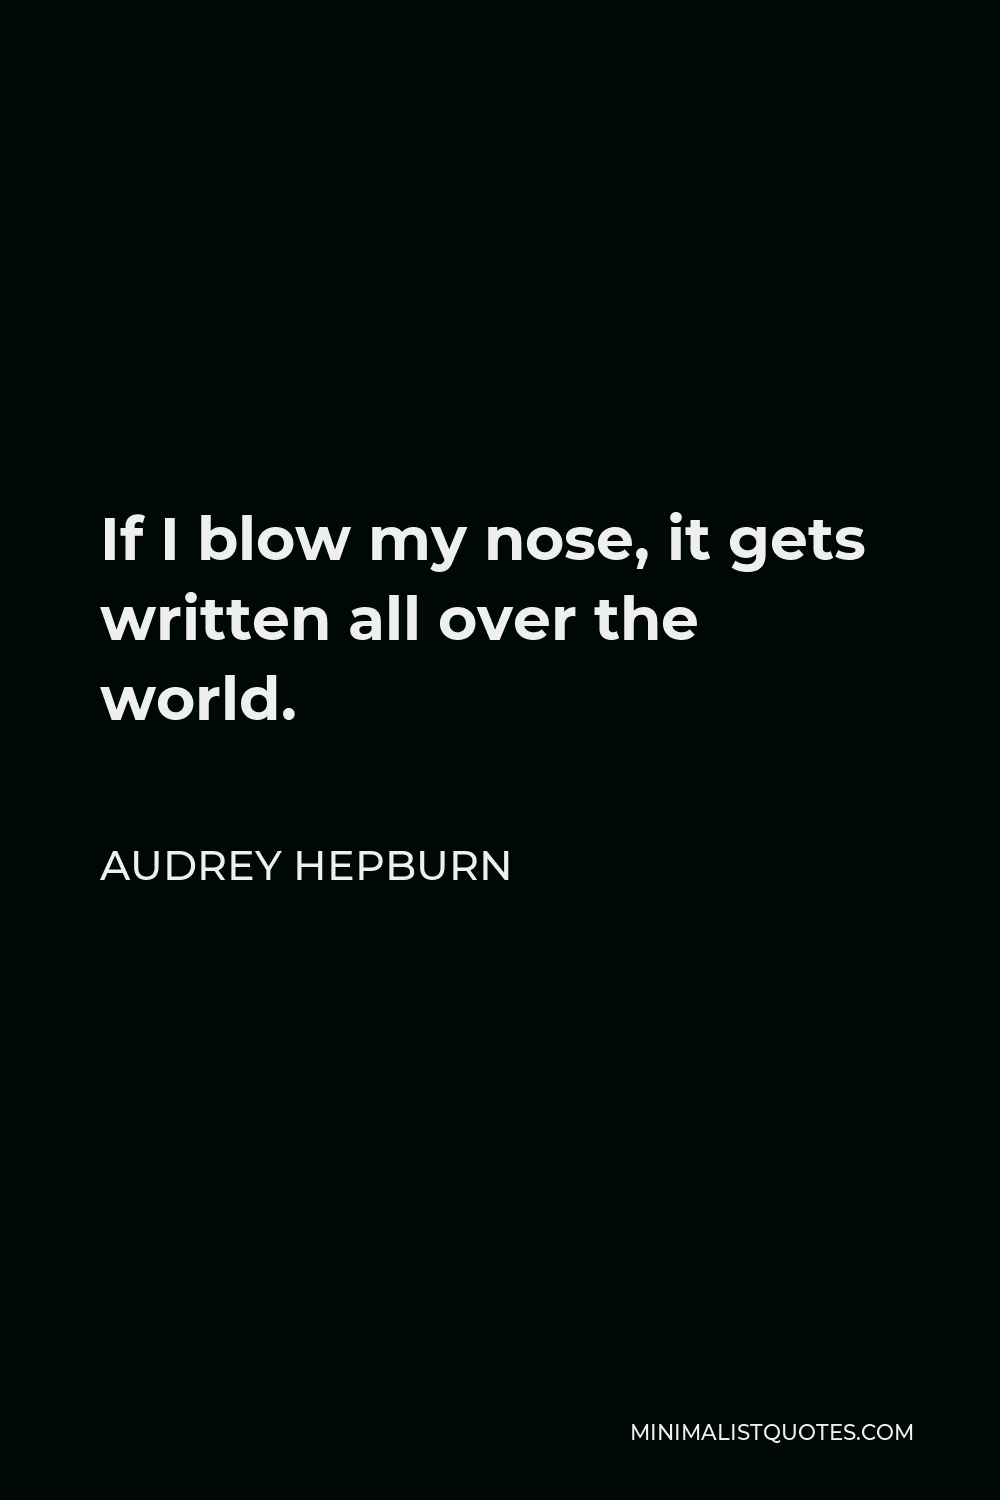 Audrey Hepburn Quote - If I blow my nose, it gets written all over the world.